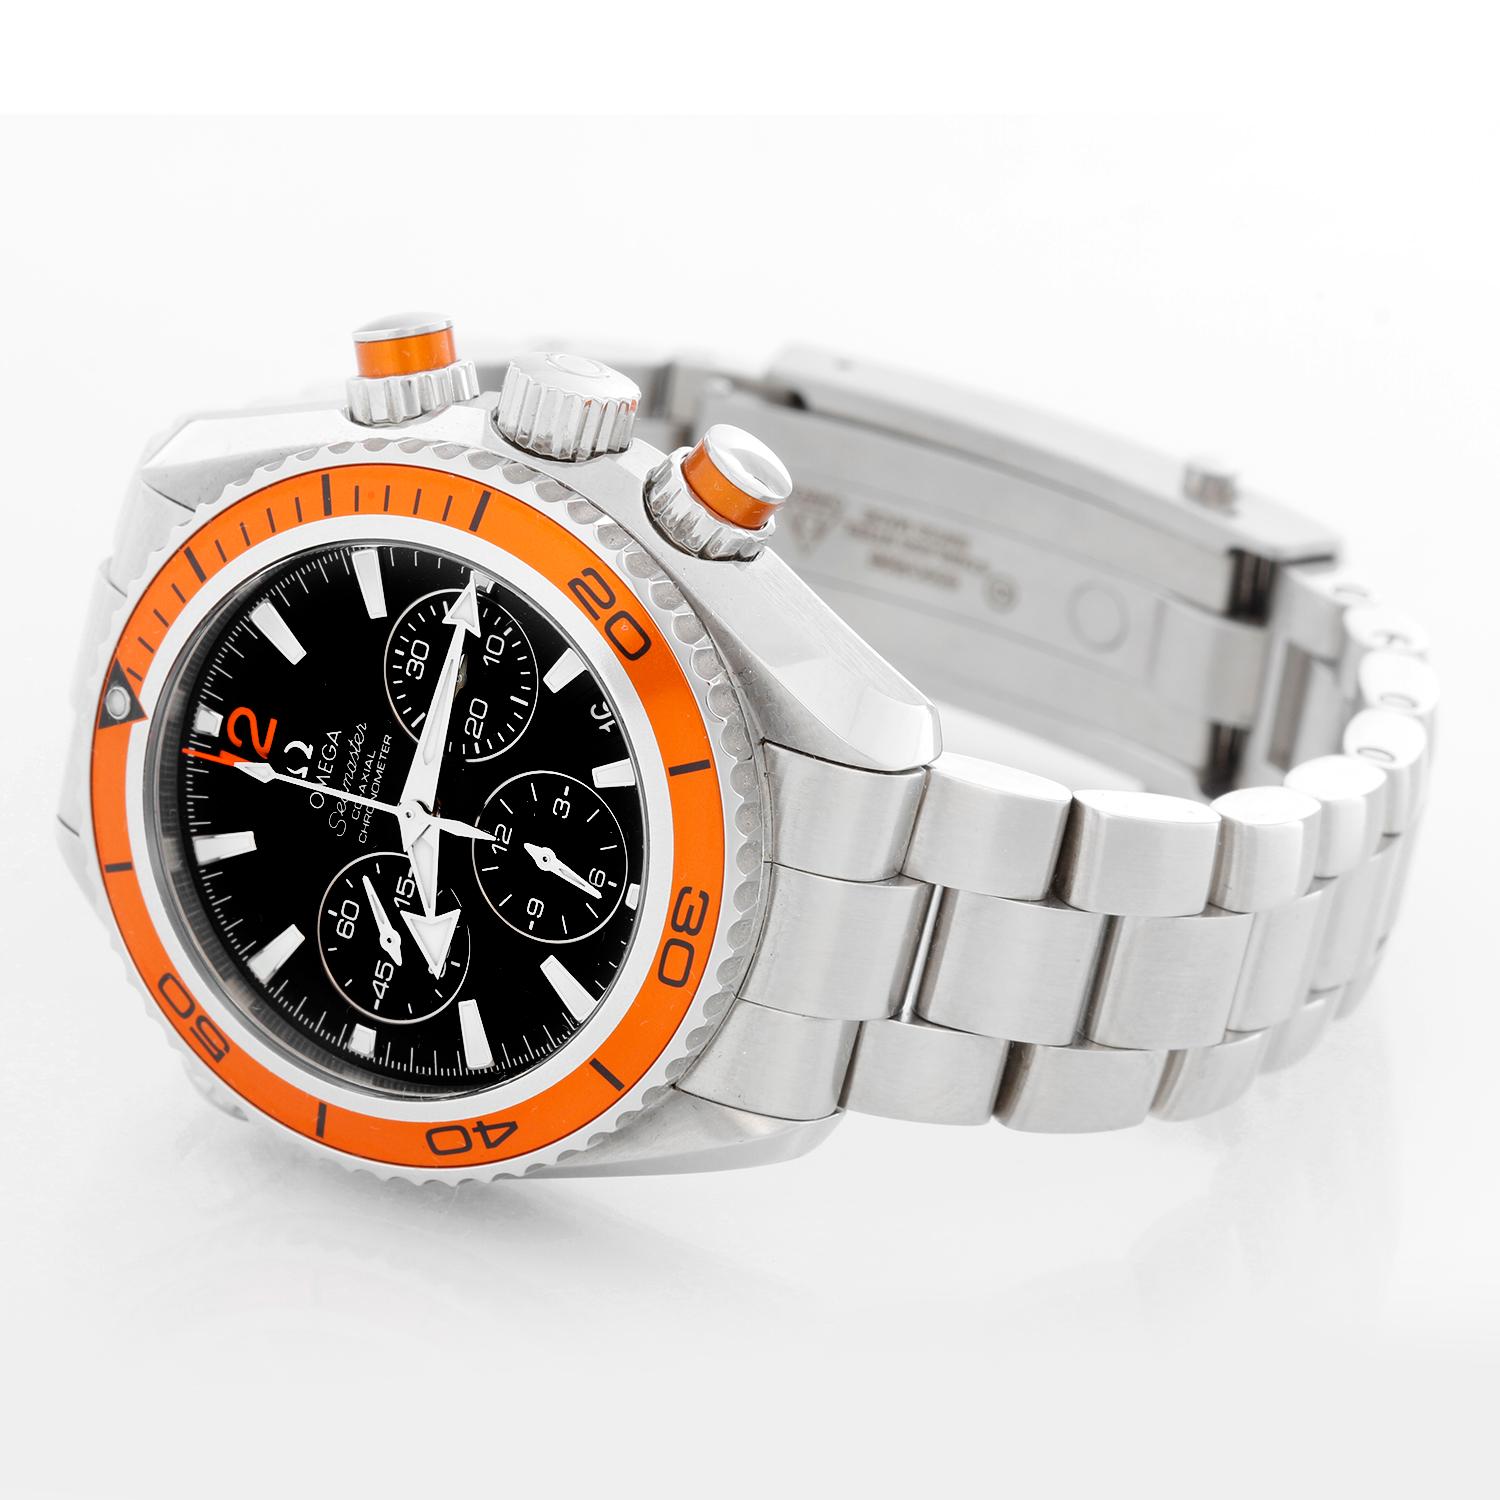 Omega Seamaster Planet Ocean Chronograph Mens Watch 222.30.38.50.01.002 - Self Winding Automatic Chronometer Co-Axial Movement. Stainless steel case with orange bezel (37 mm) Appears to have never been worn but has some shop wear on it. Black dial